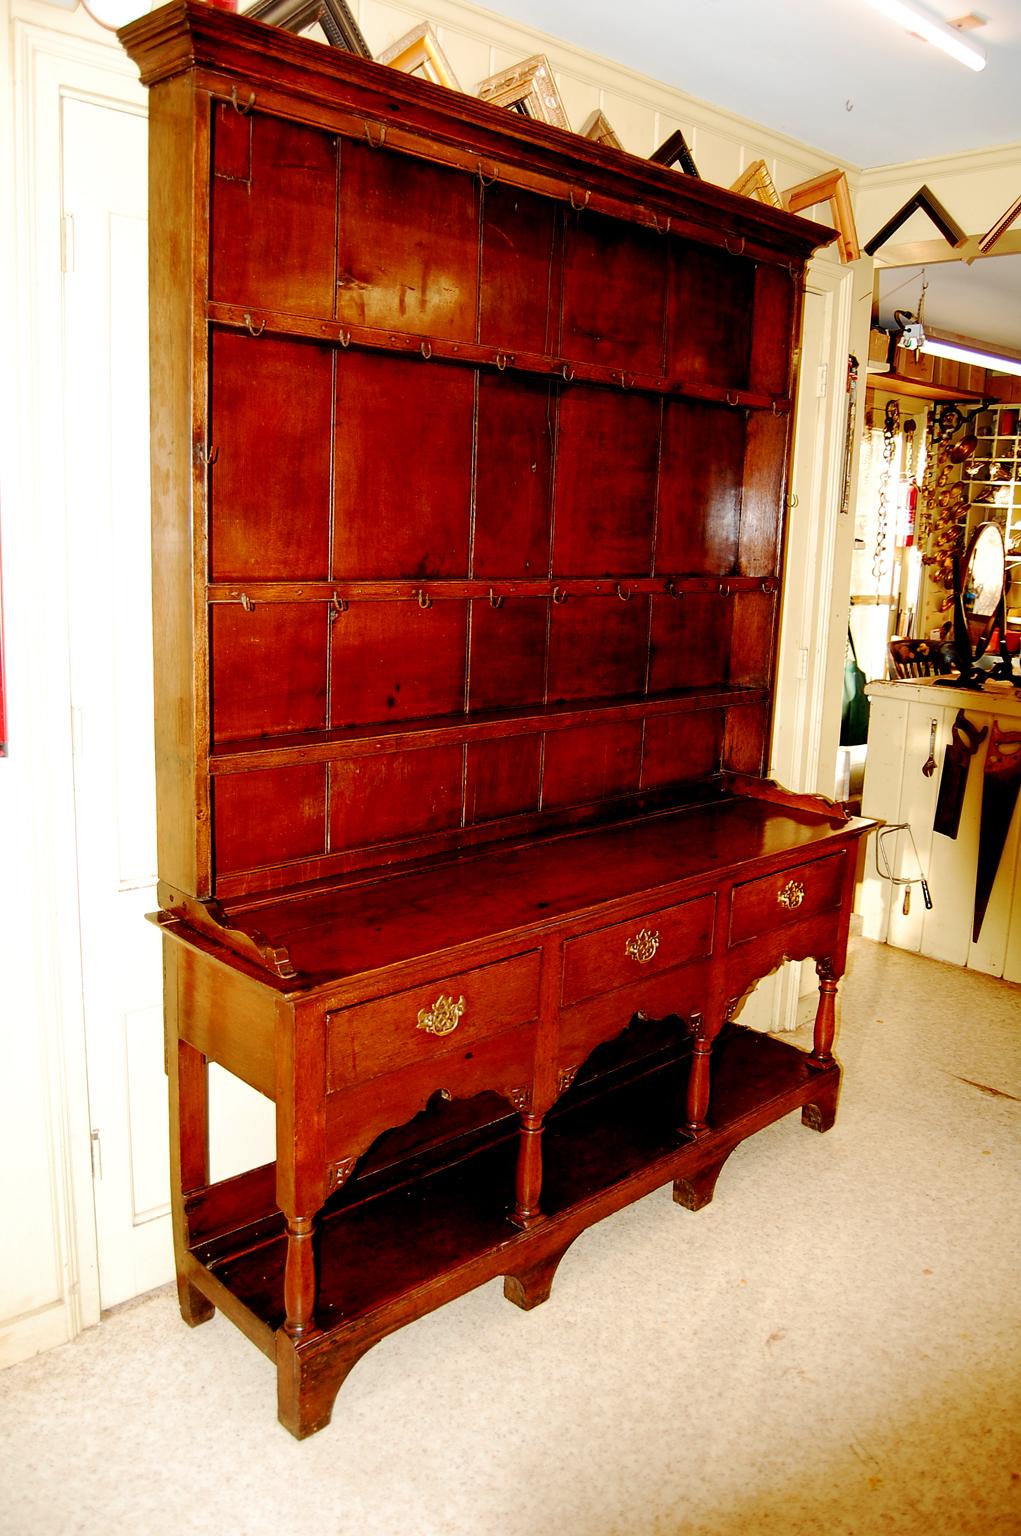 Welsh Georgian oak potboard dresser in two parts.  This full dresser has three working drawers and a lower shelf (called a potboard shelf) which would store large pots, cookware or dairy jugs.  The  pierced skirting under the drawers is nicely